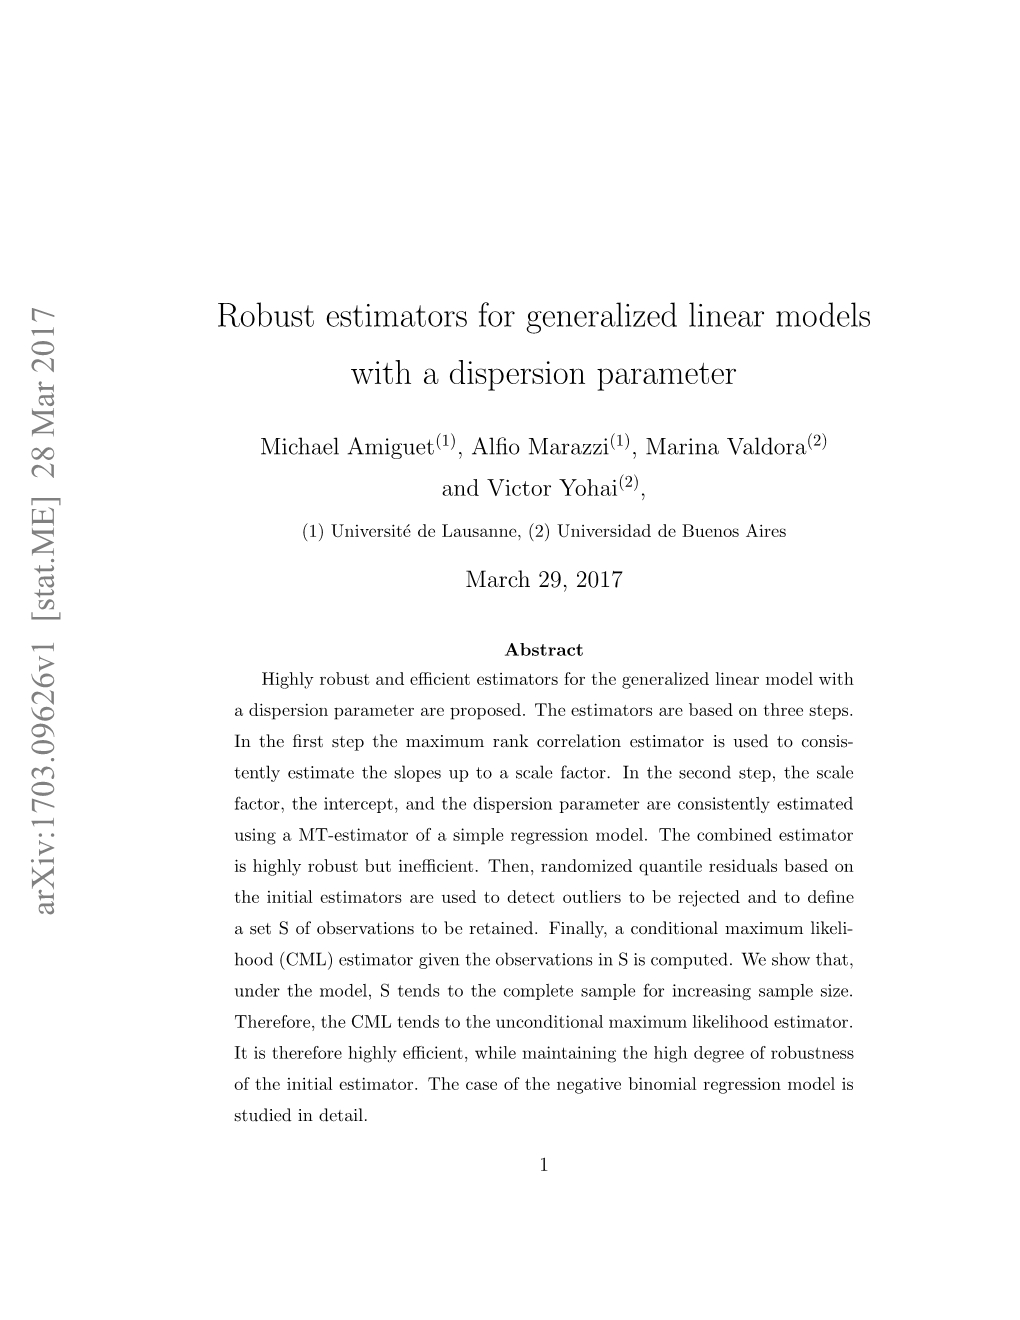 Robust Estimators for Generalized Linear Models with a Dispersion